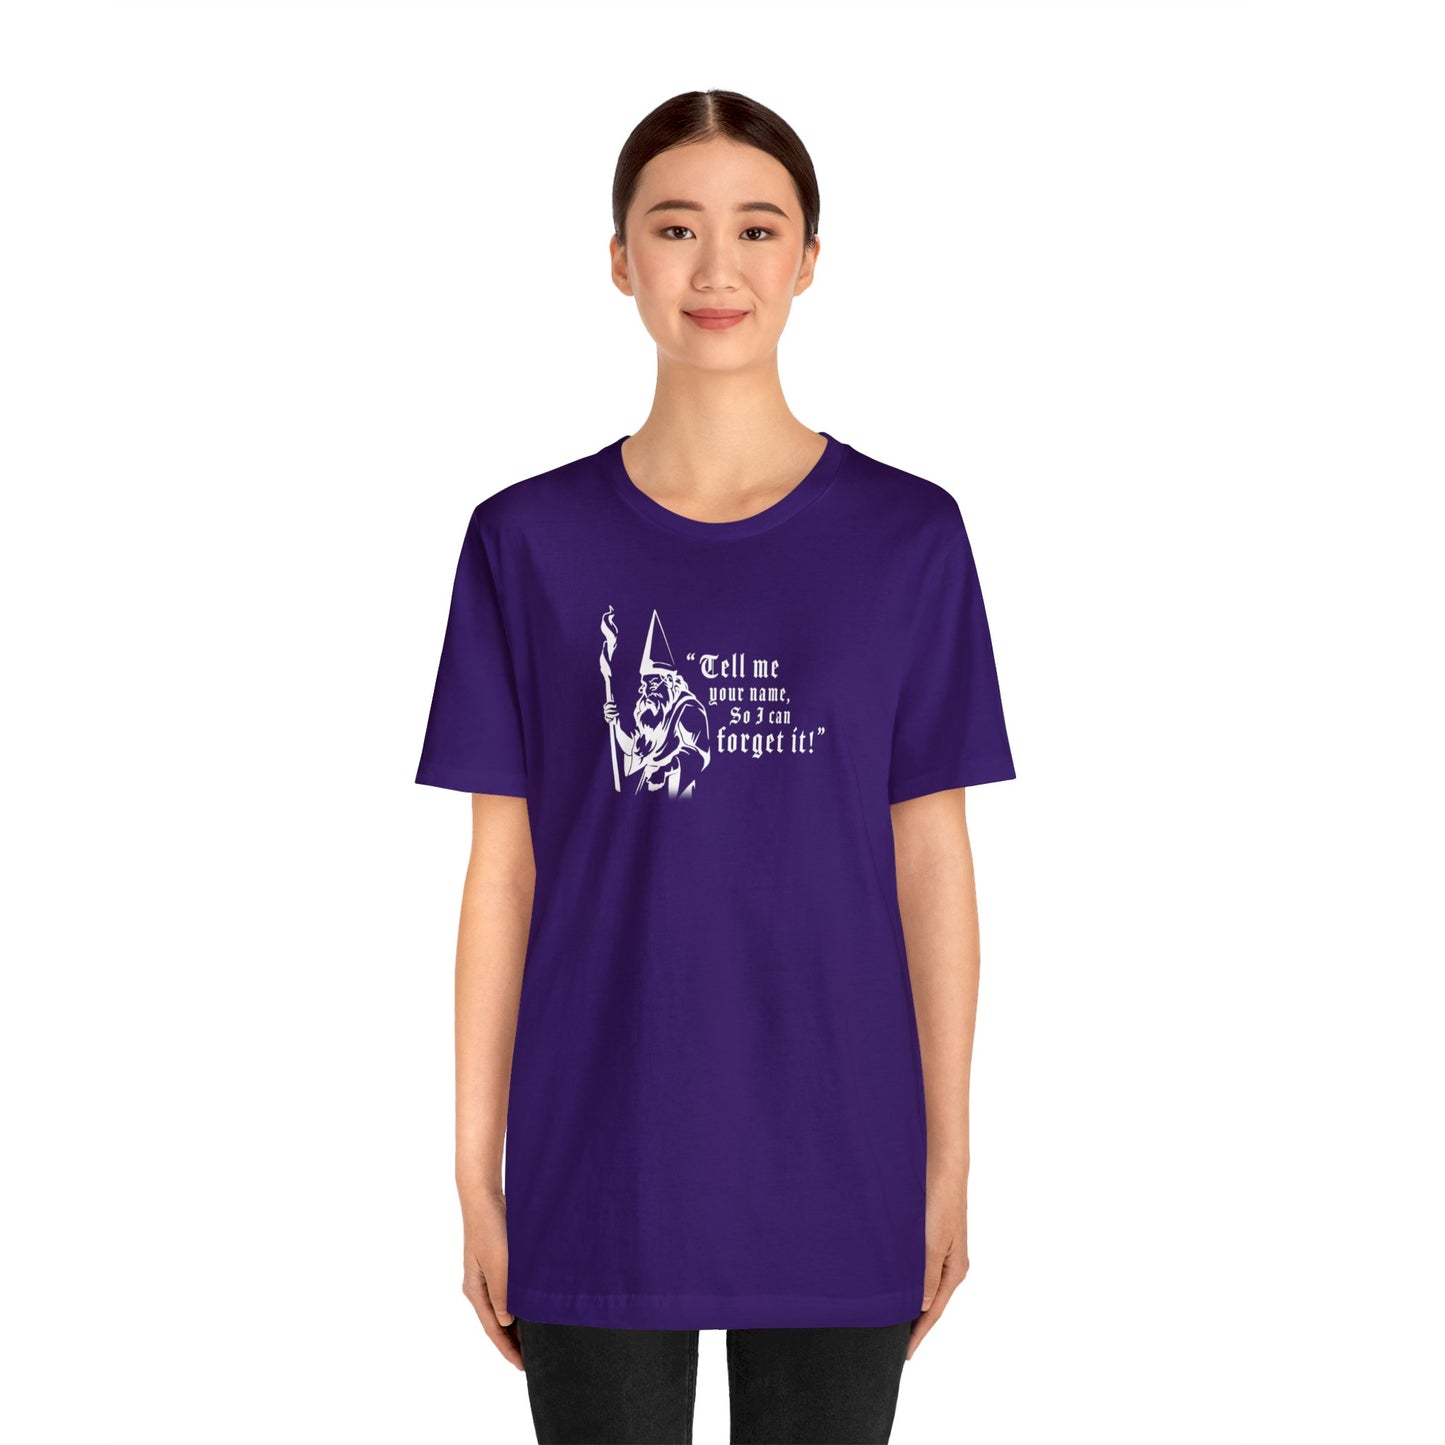 "Tell me your Name" (Oswald Version) - Call To Quest T-Shirt